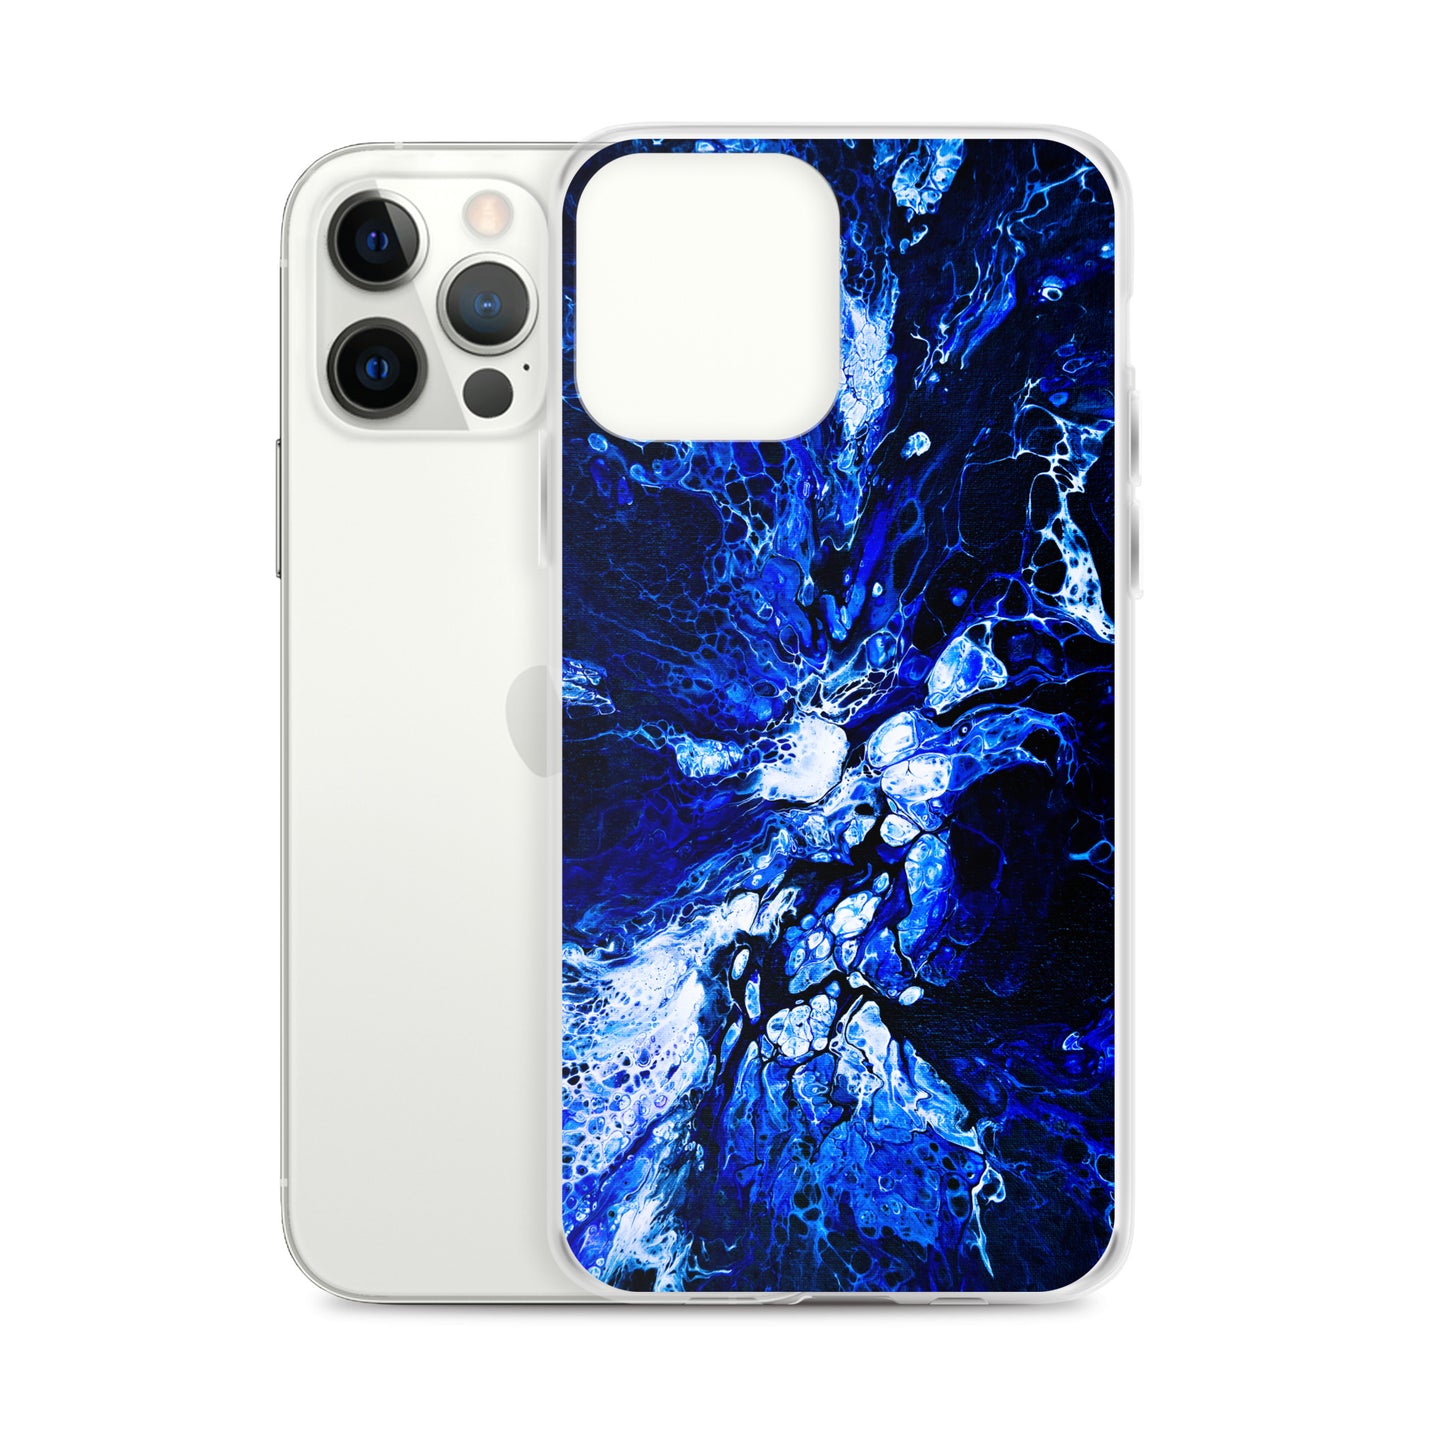 NightOwl Studio Custom Phone Case Compatible with iPhone, Ultra Slim Cover with Heavy Duty Scratch Resistant Shockproof Protection, Blue Burst